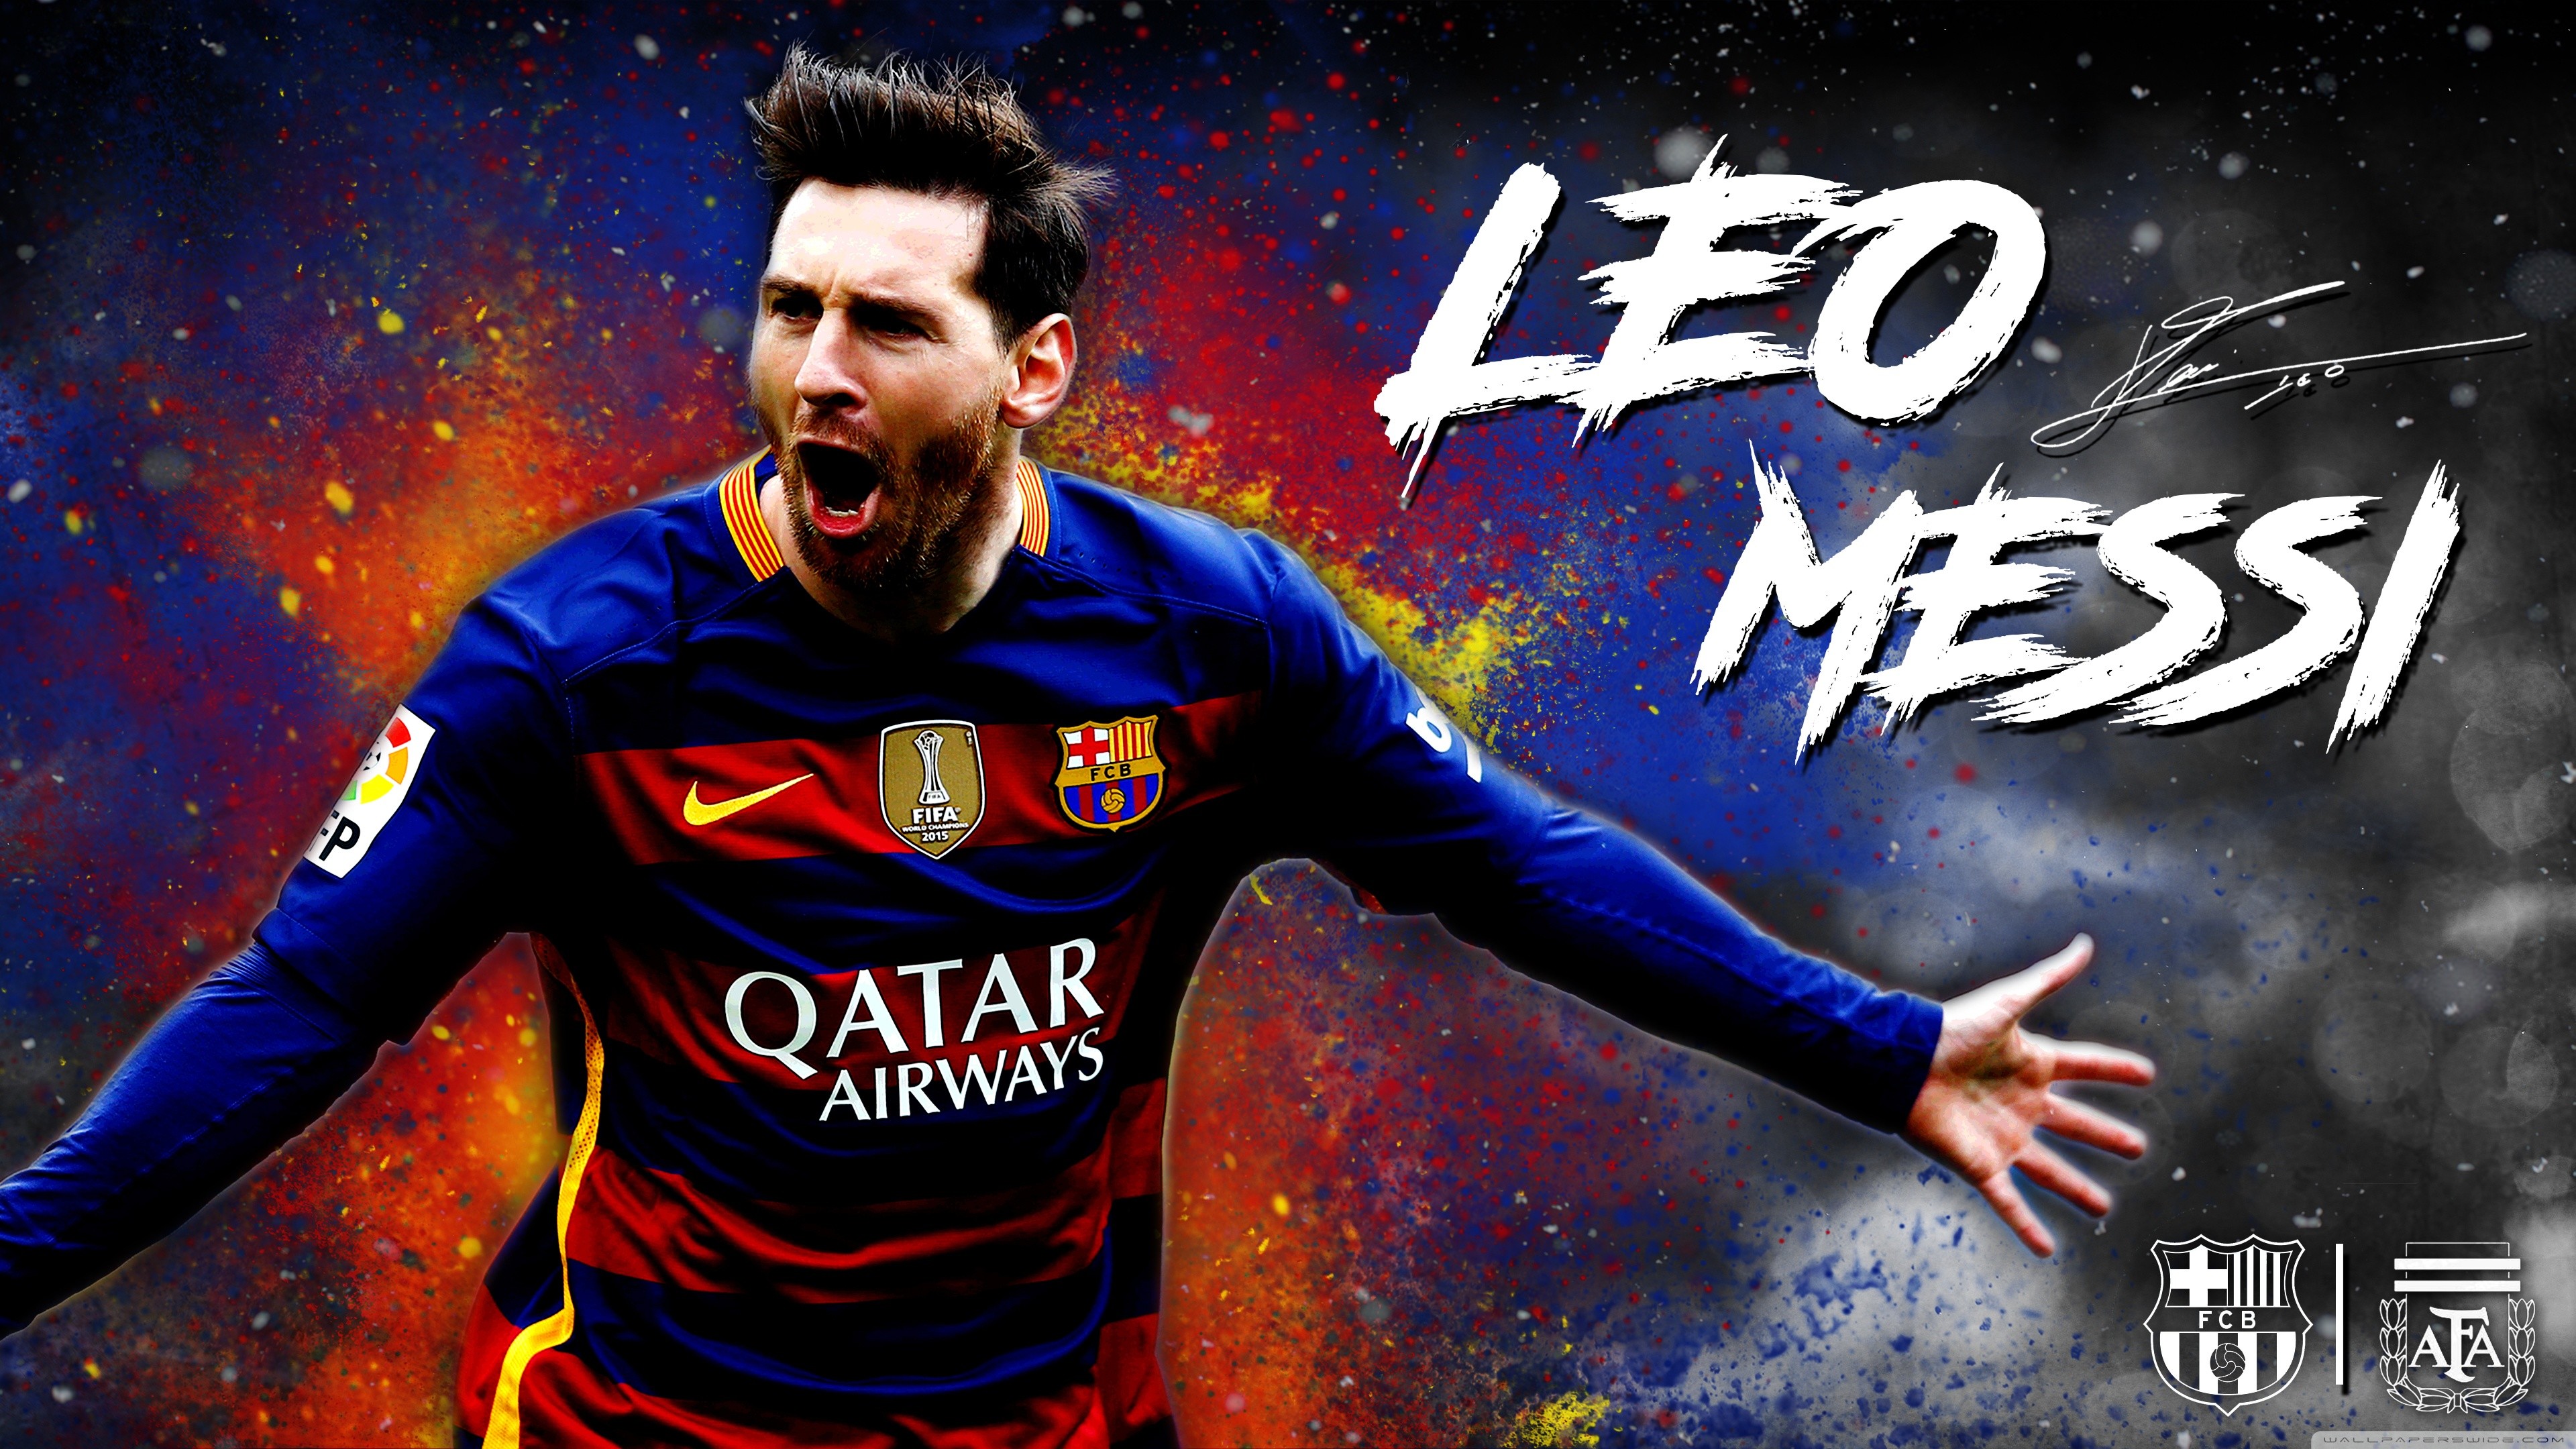 Messi Backgrounds (80+ images)